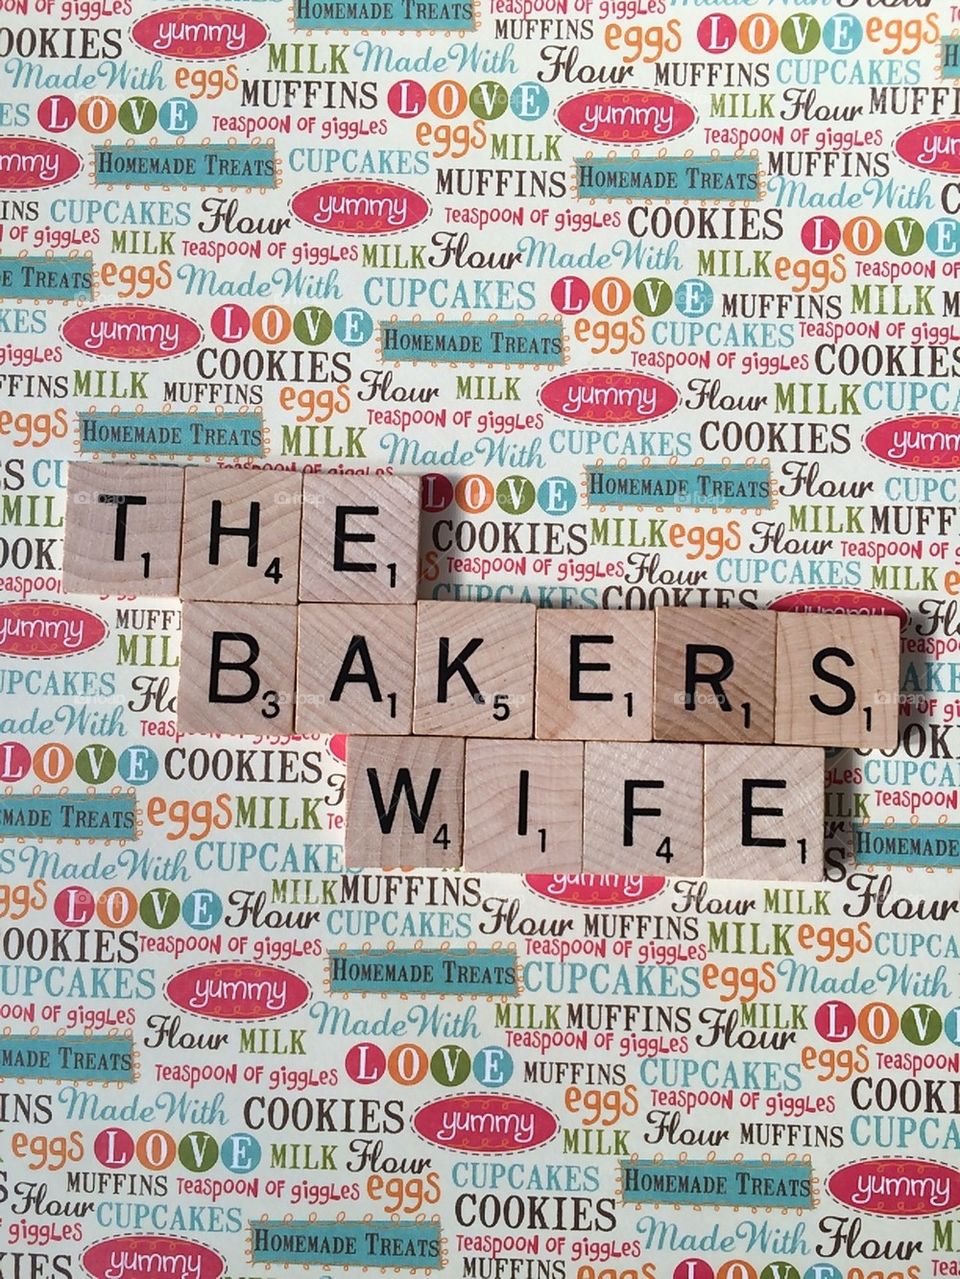 The bakers wife